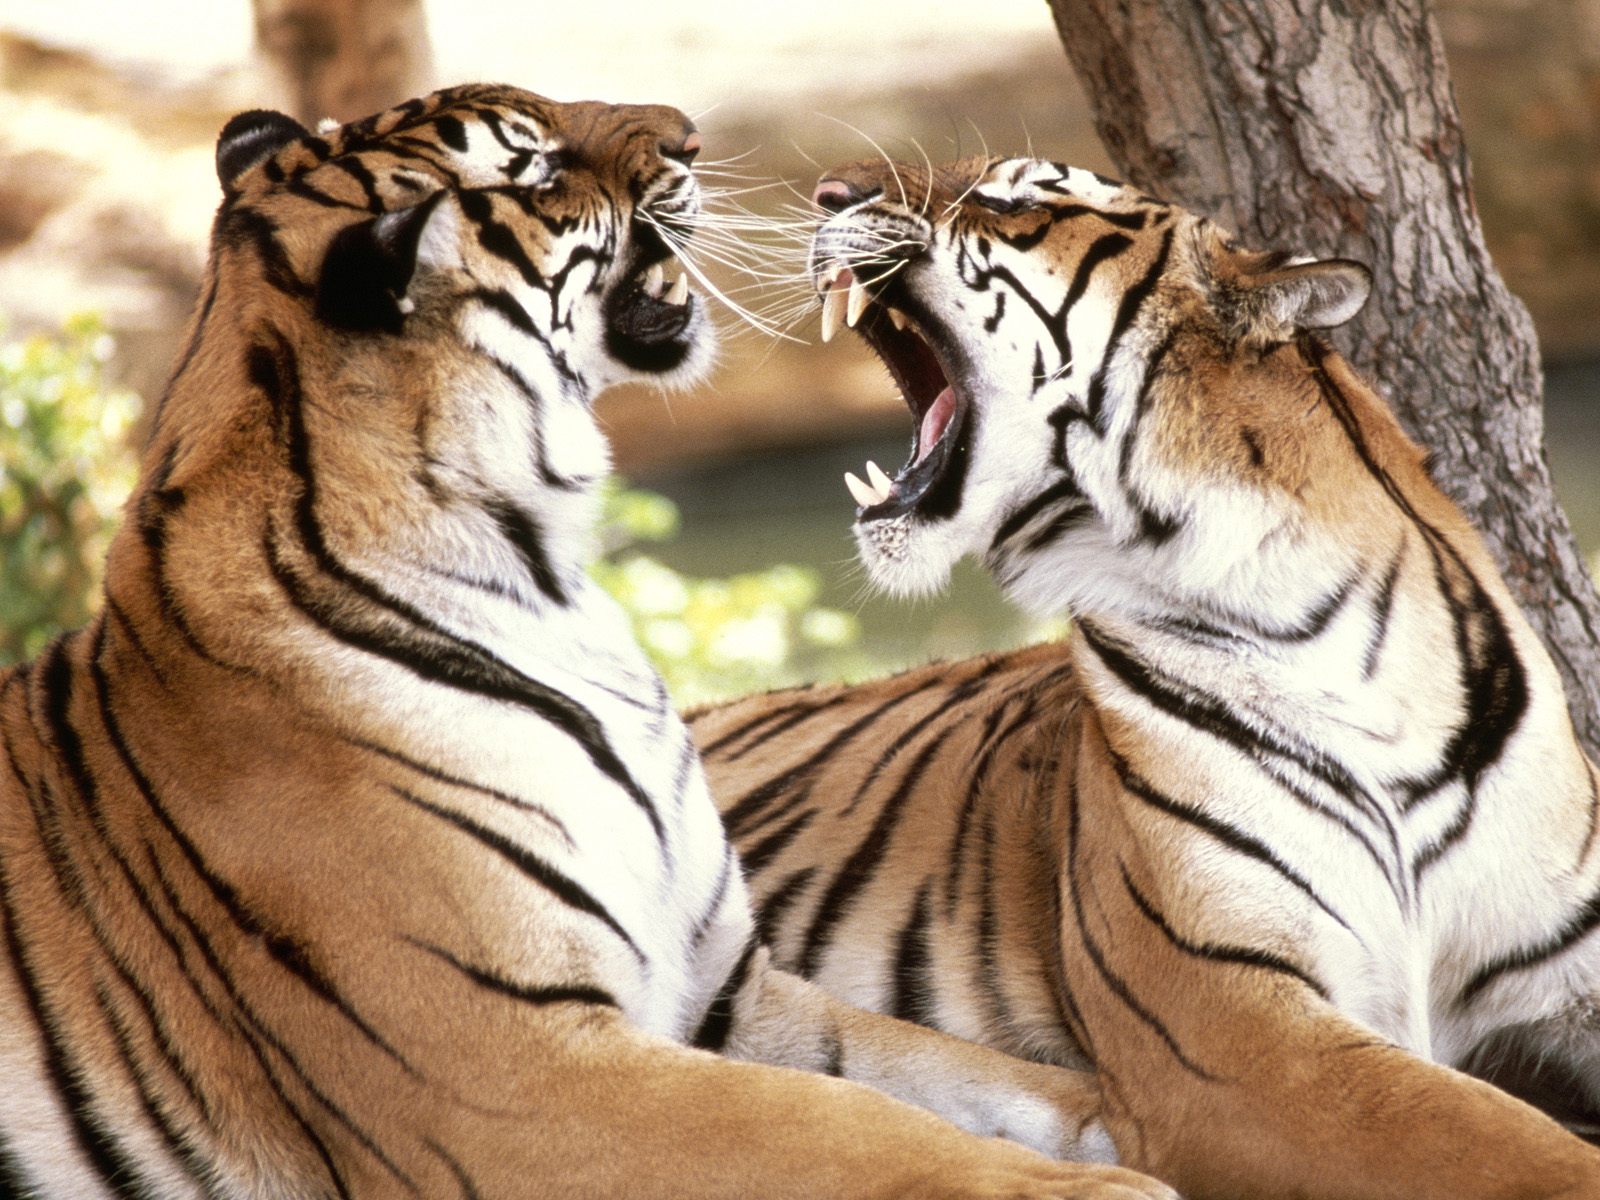 Gallery Wallpapere New Royal Bengal Tiger